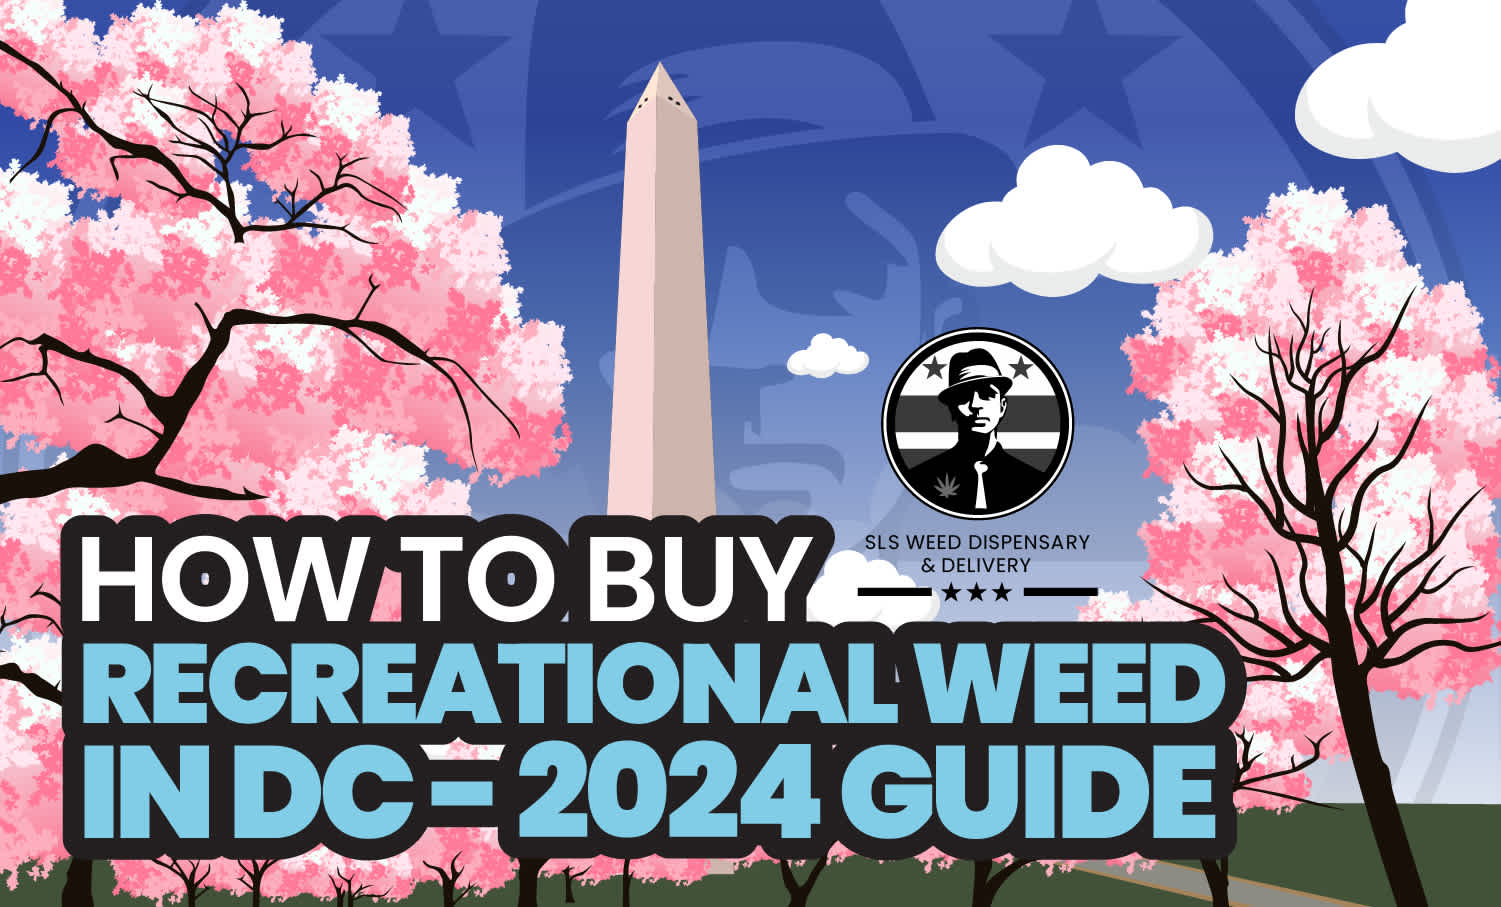 How To Buy Recreational Weed In DC -2024 Guide